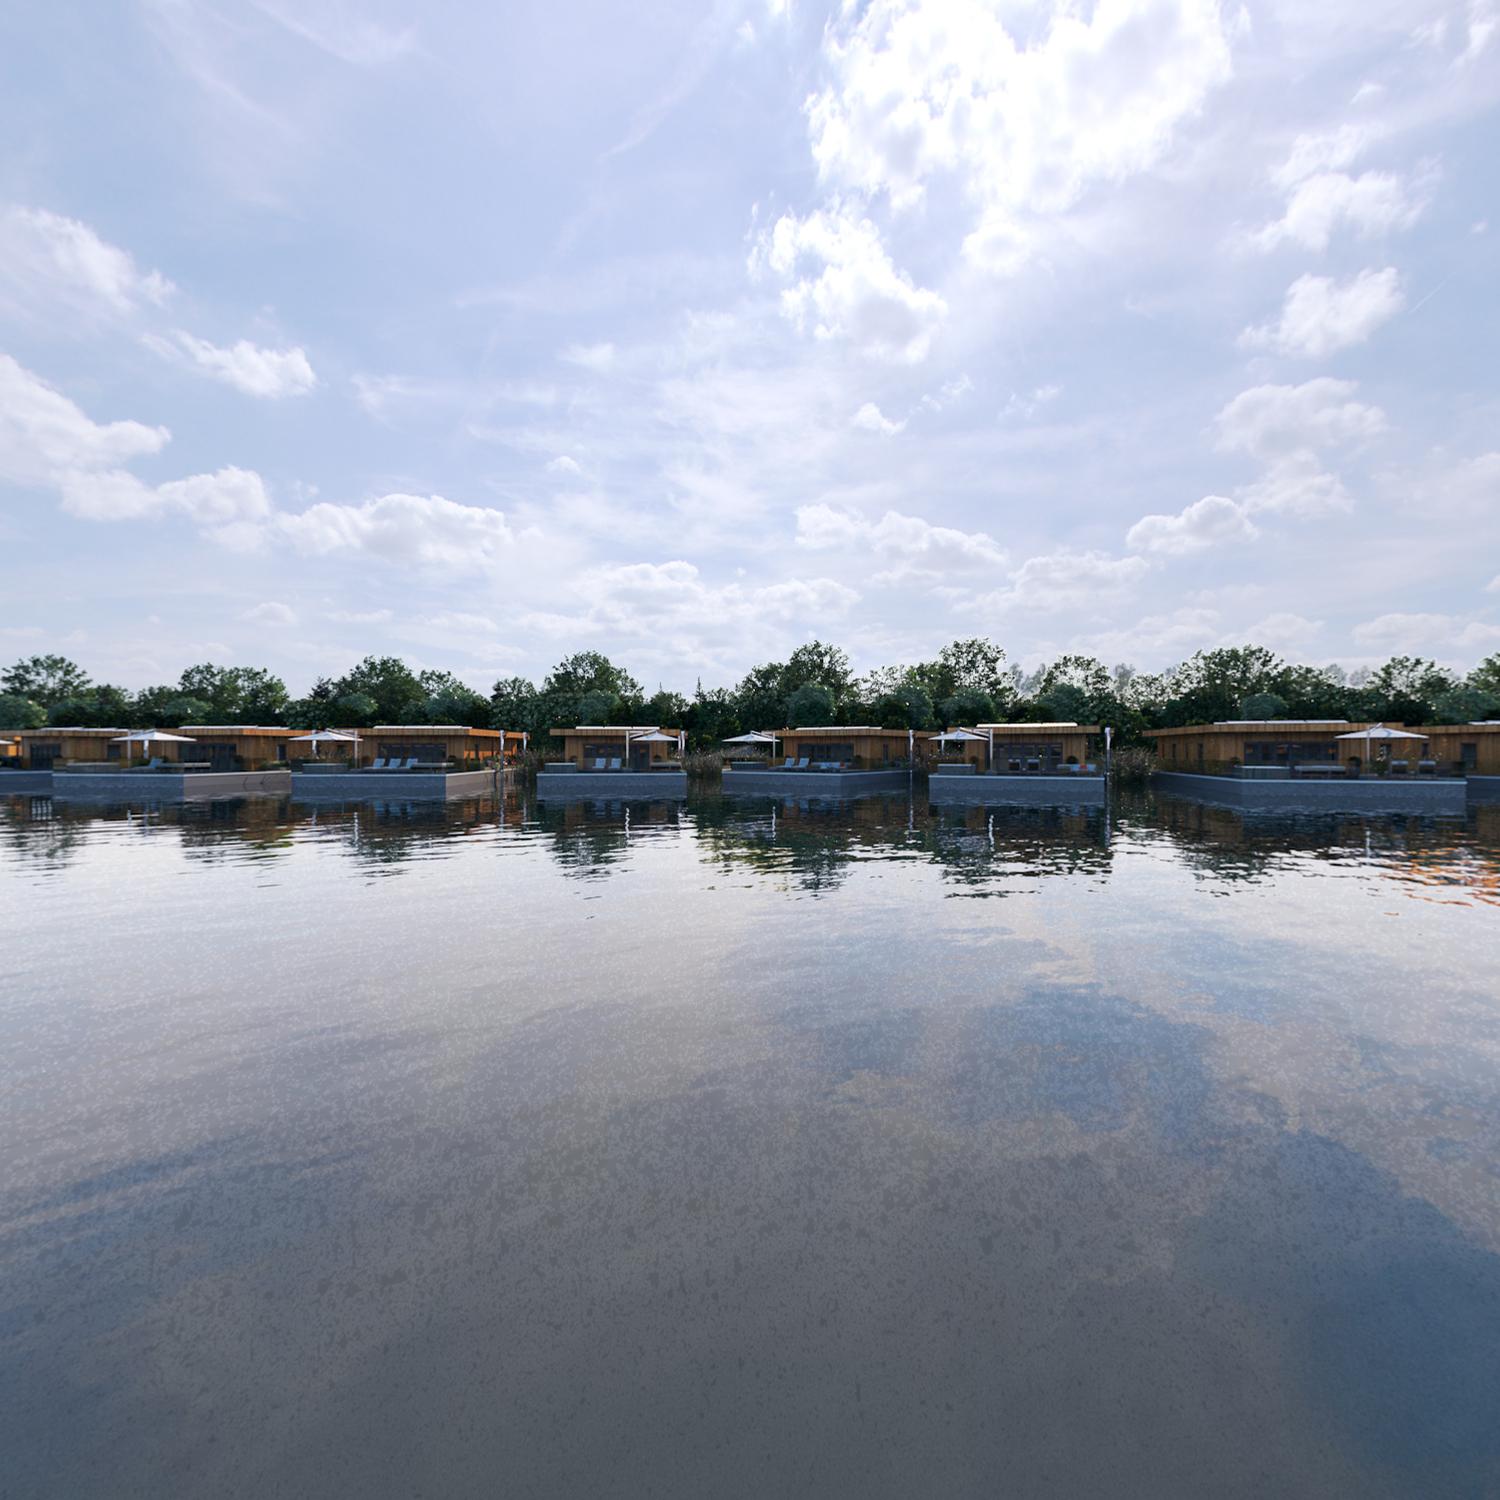 Fifty eco lodges, currently under construction, will float amongst reed beds at the side of the western lake and, when completed, the hotel and spa will serve lodge residents as well as their own guests